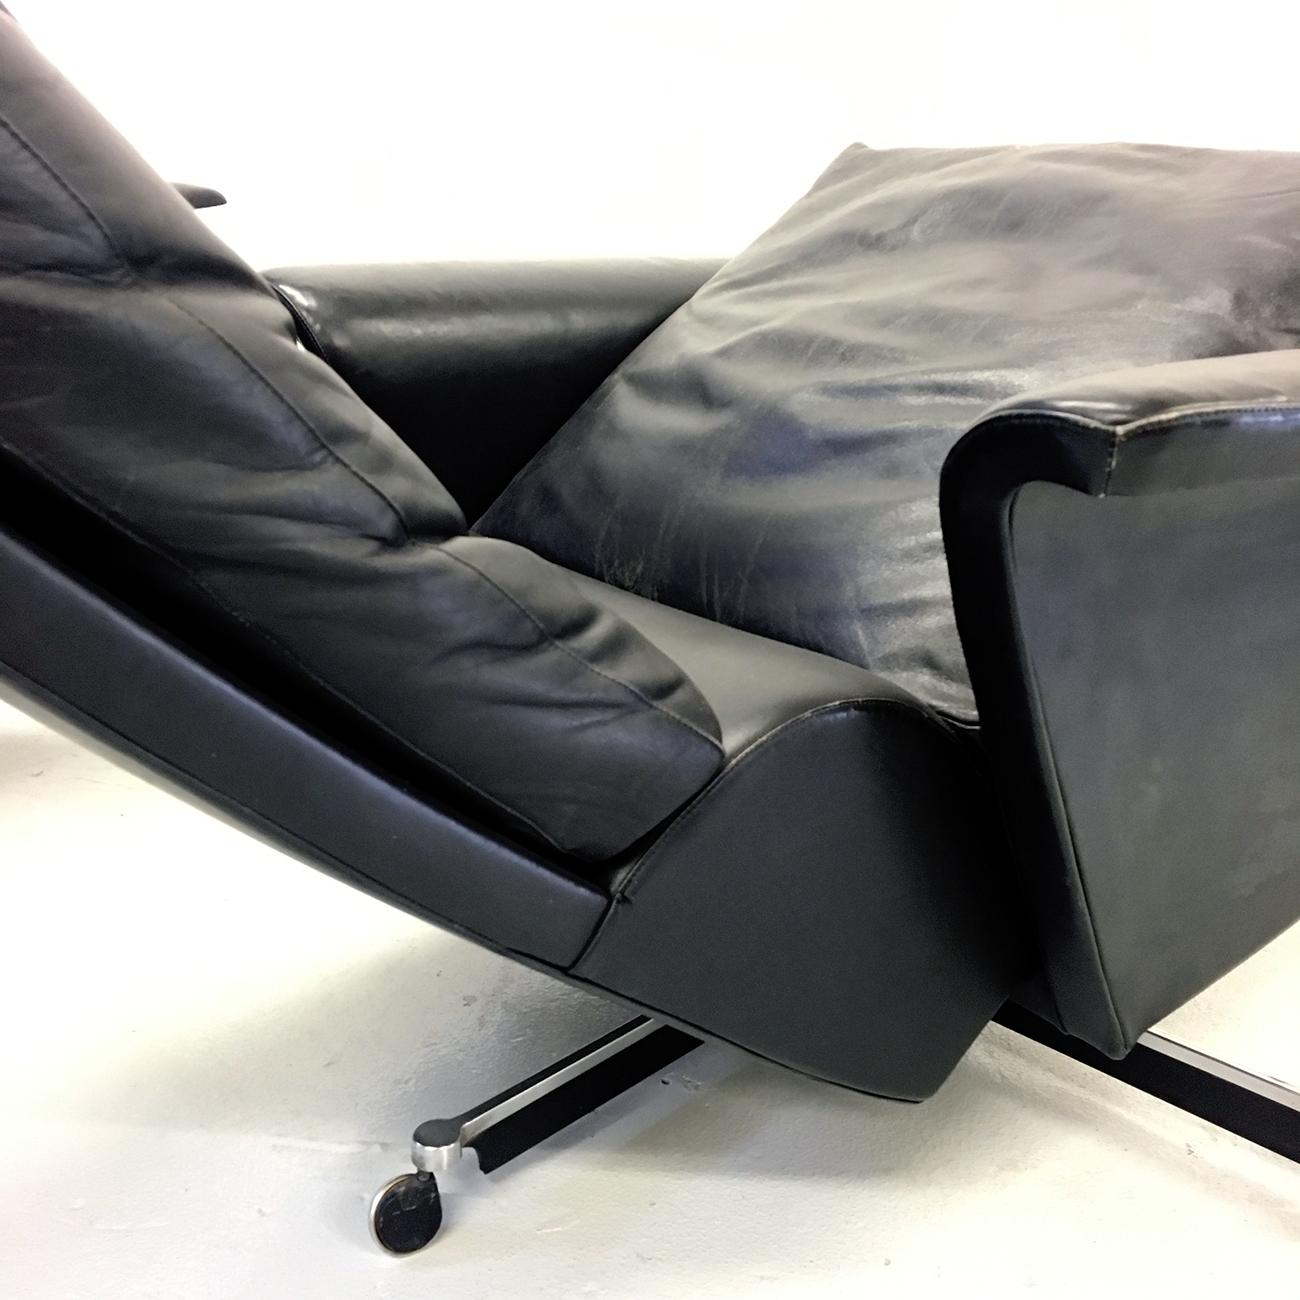 Pair of 1960s Mid-Century Modern Black Leather Reclining Lay-Z-Boy Lounge Chairs 1